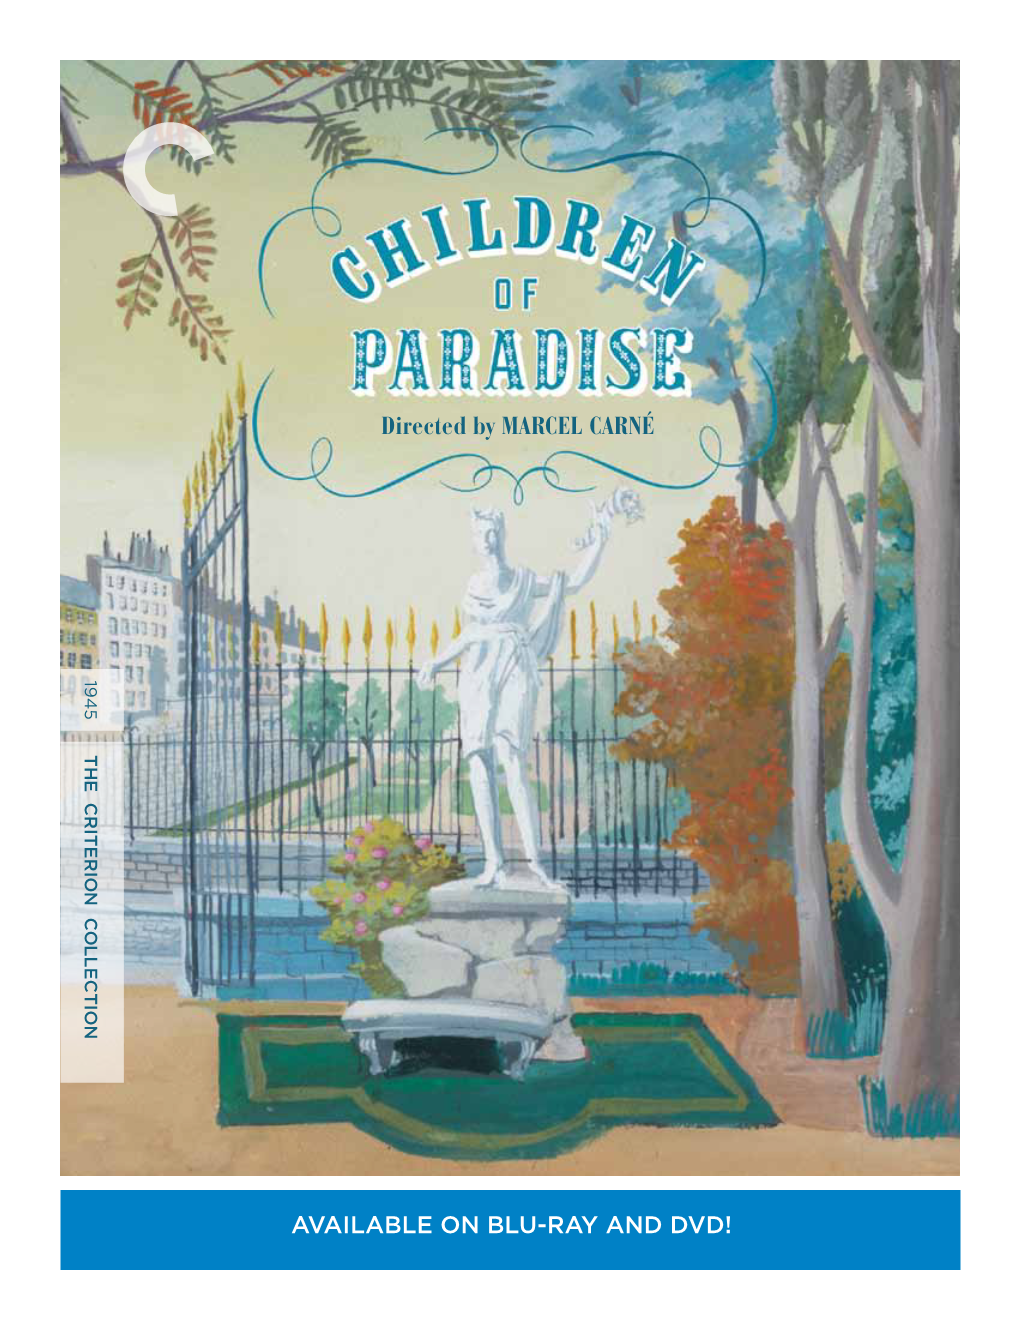 CRITERION COLLECTION PRESENTS Children of Paradise